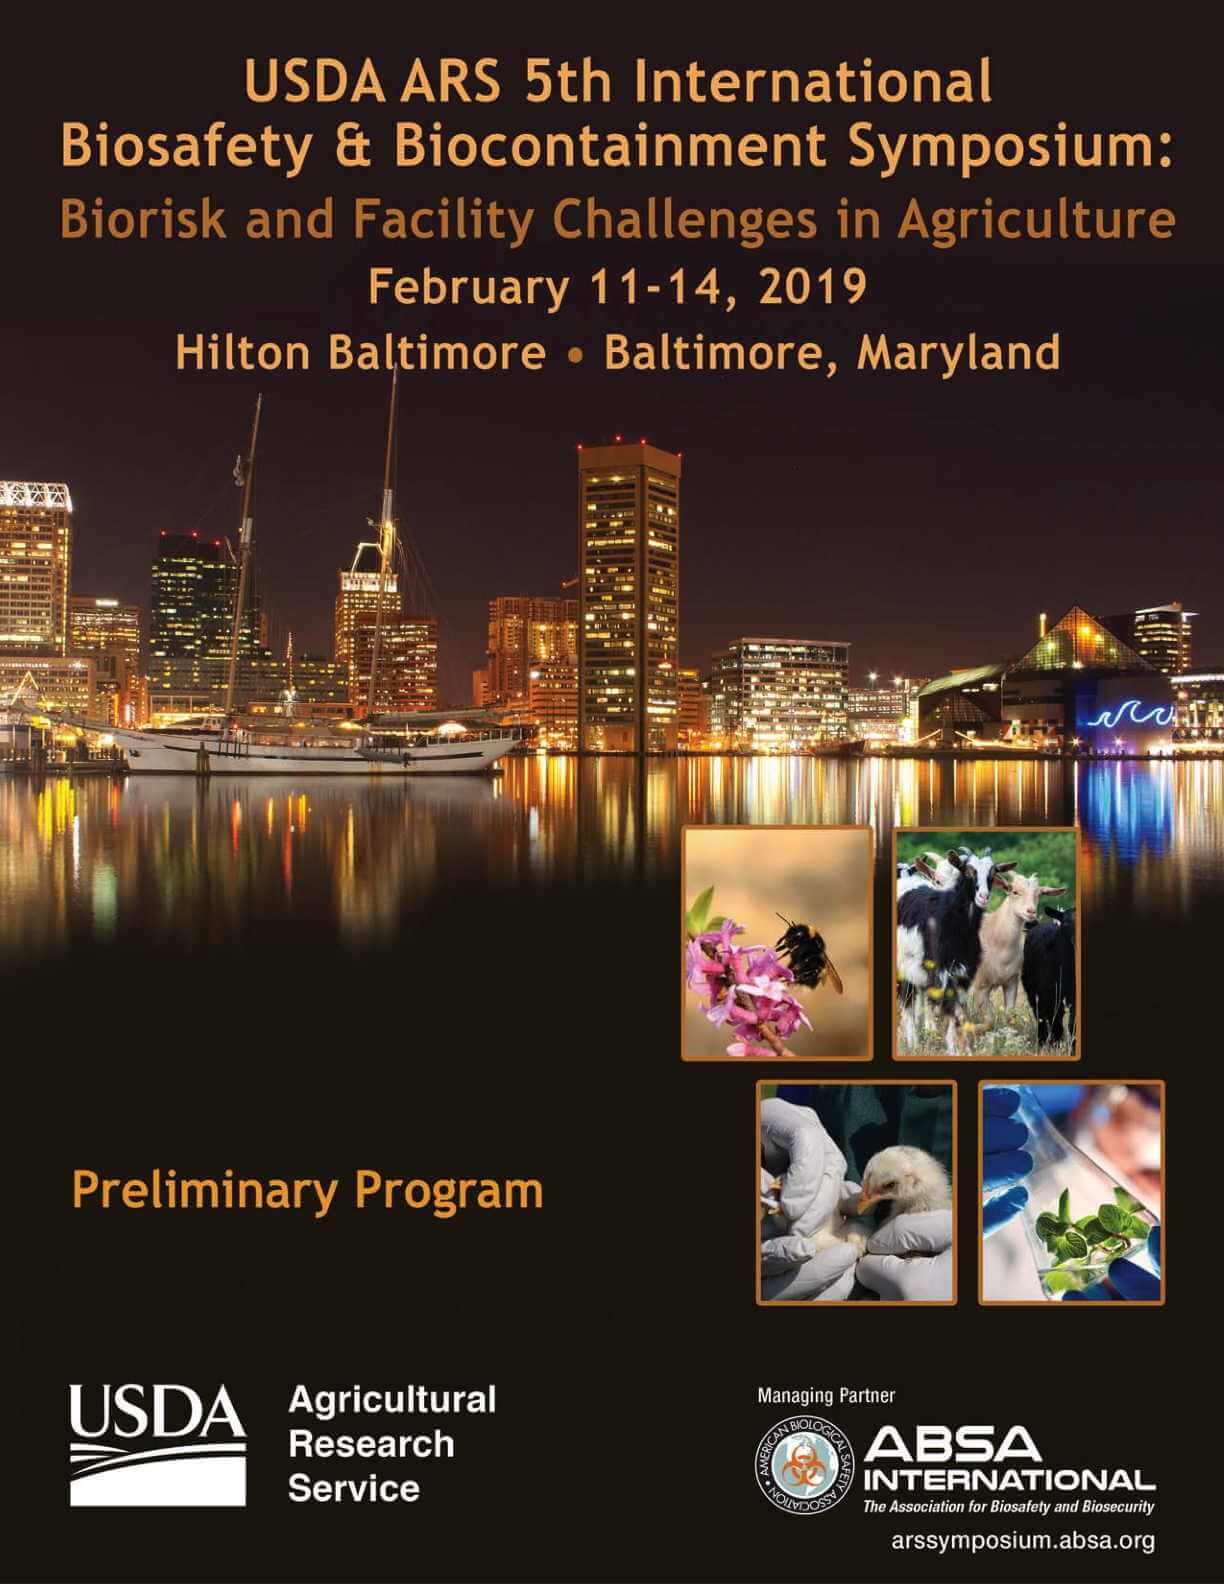 USDA ARS 5th International Biosafety & Biocontainment Symposium: Biorisk and Facility Challenges in Agriculture: Preliminary Program